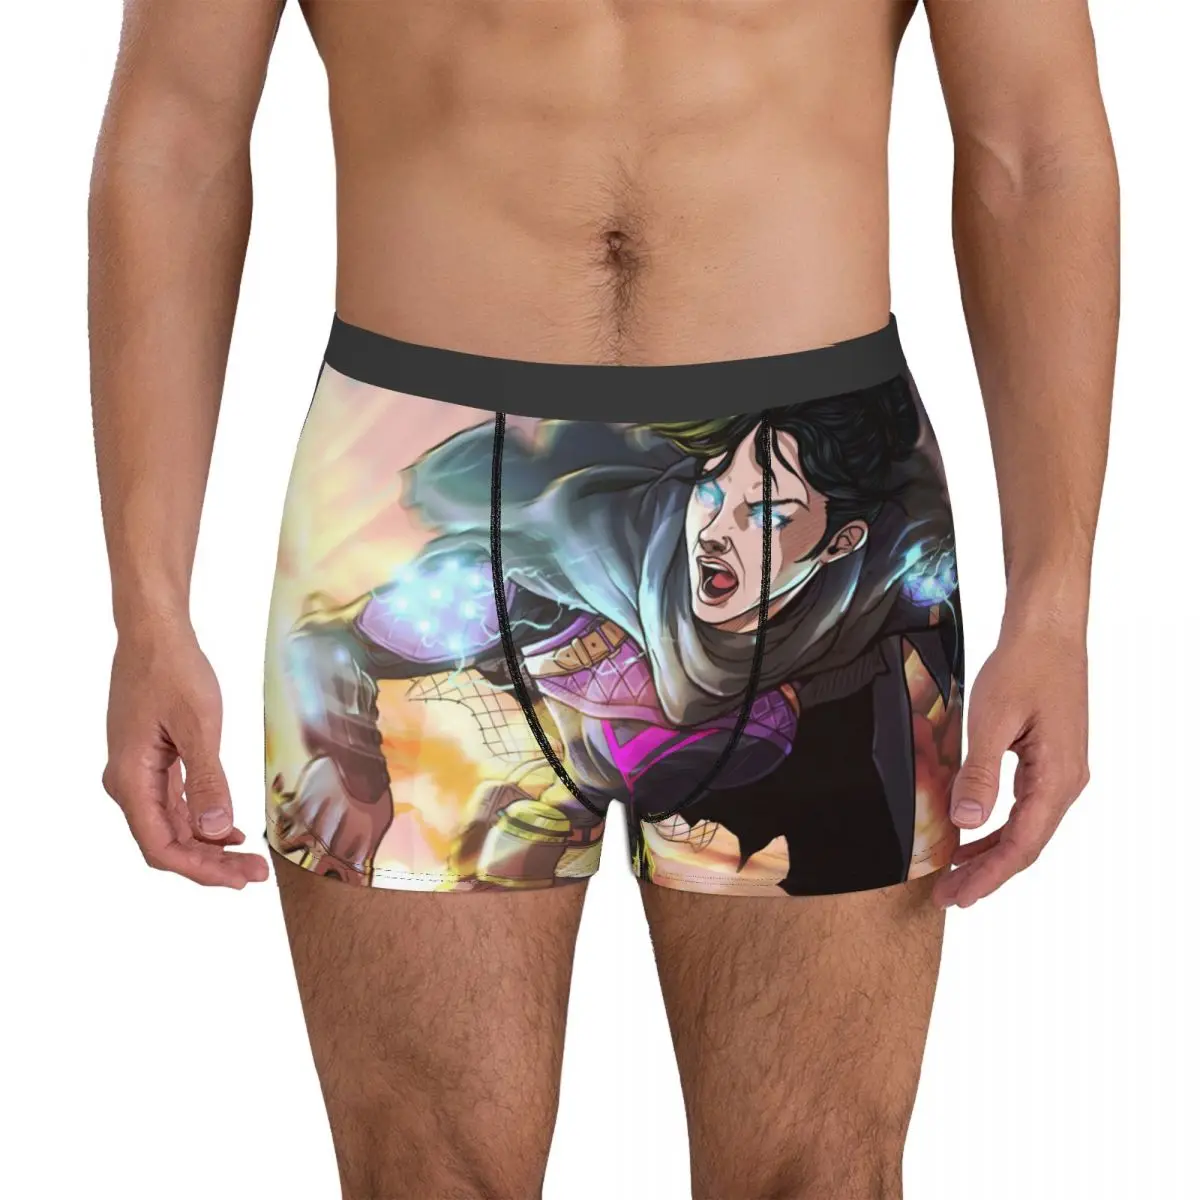 

Rar Apex Legends Crypto Shooting Game Underpants Breathbale Panties Male Underwear Sexy Shorts Boxer Briefs